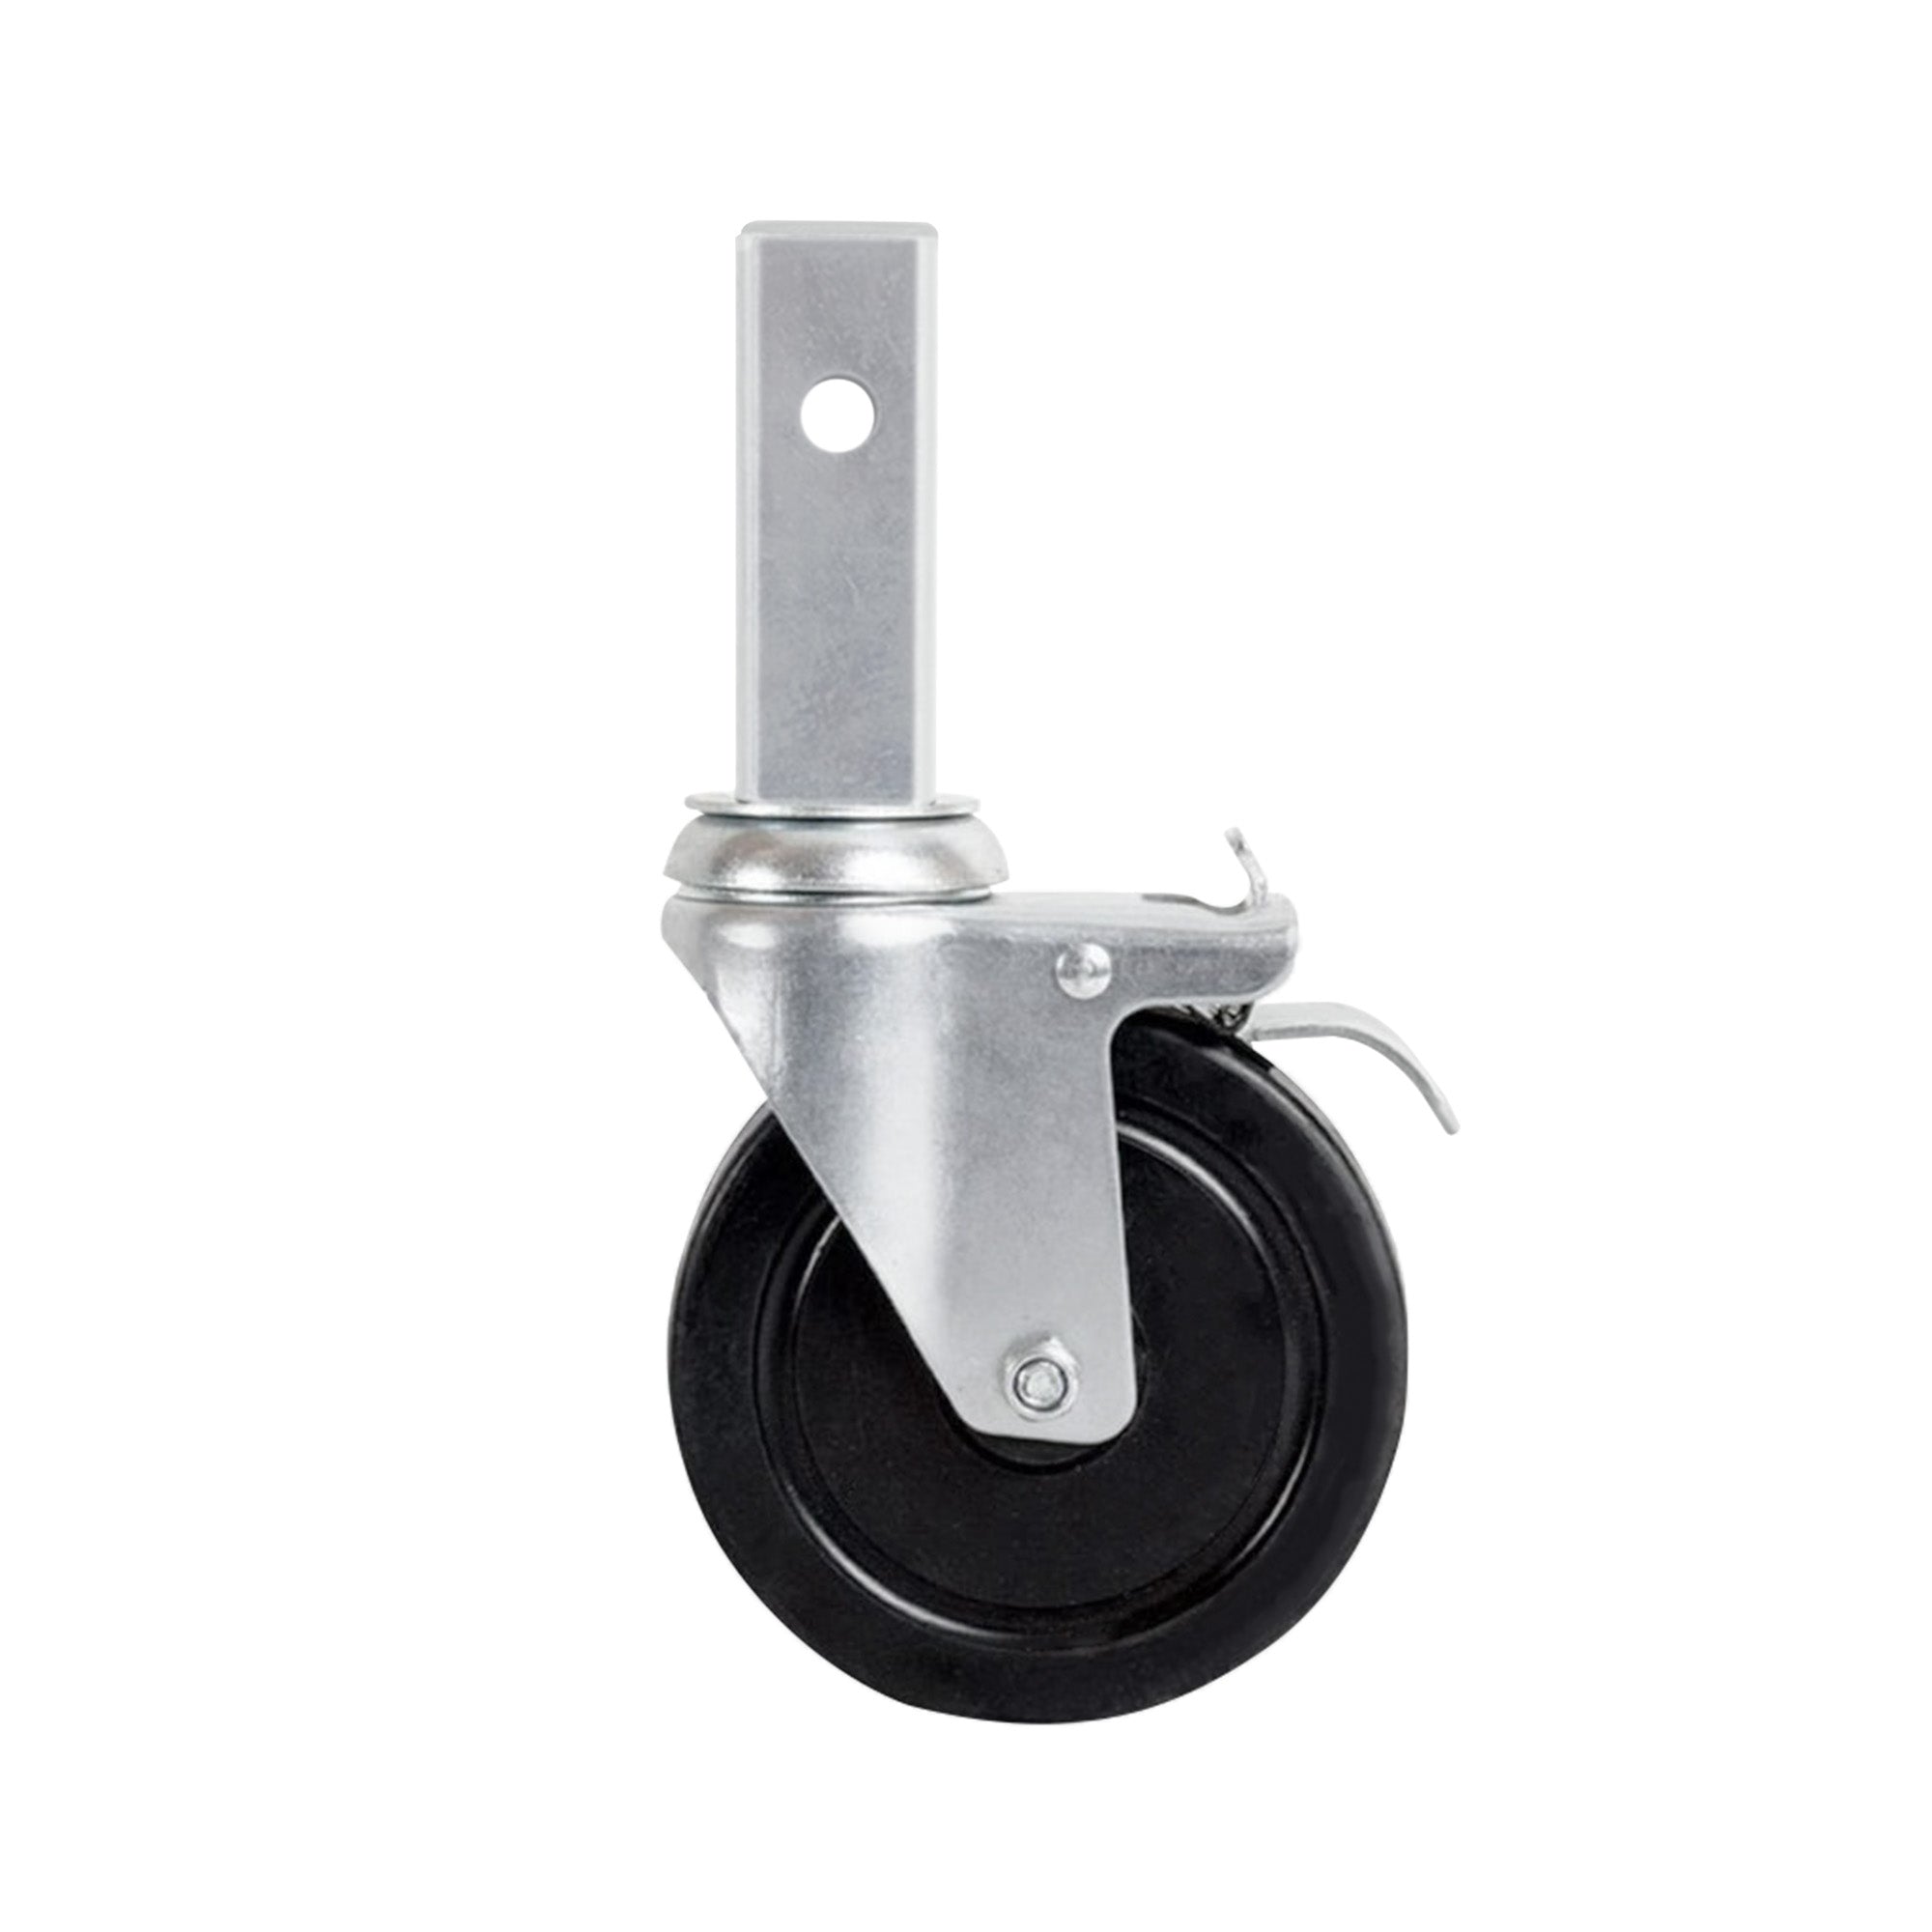 Metaltech 5" Casters with Locking Pin for Jobsite Series Baker Scaffold